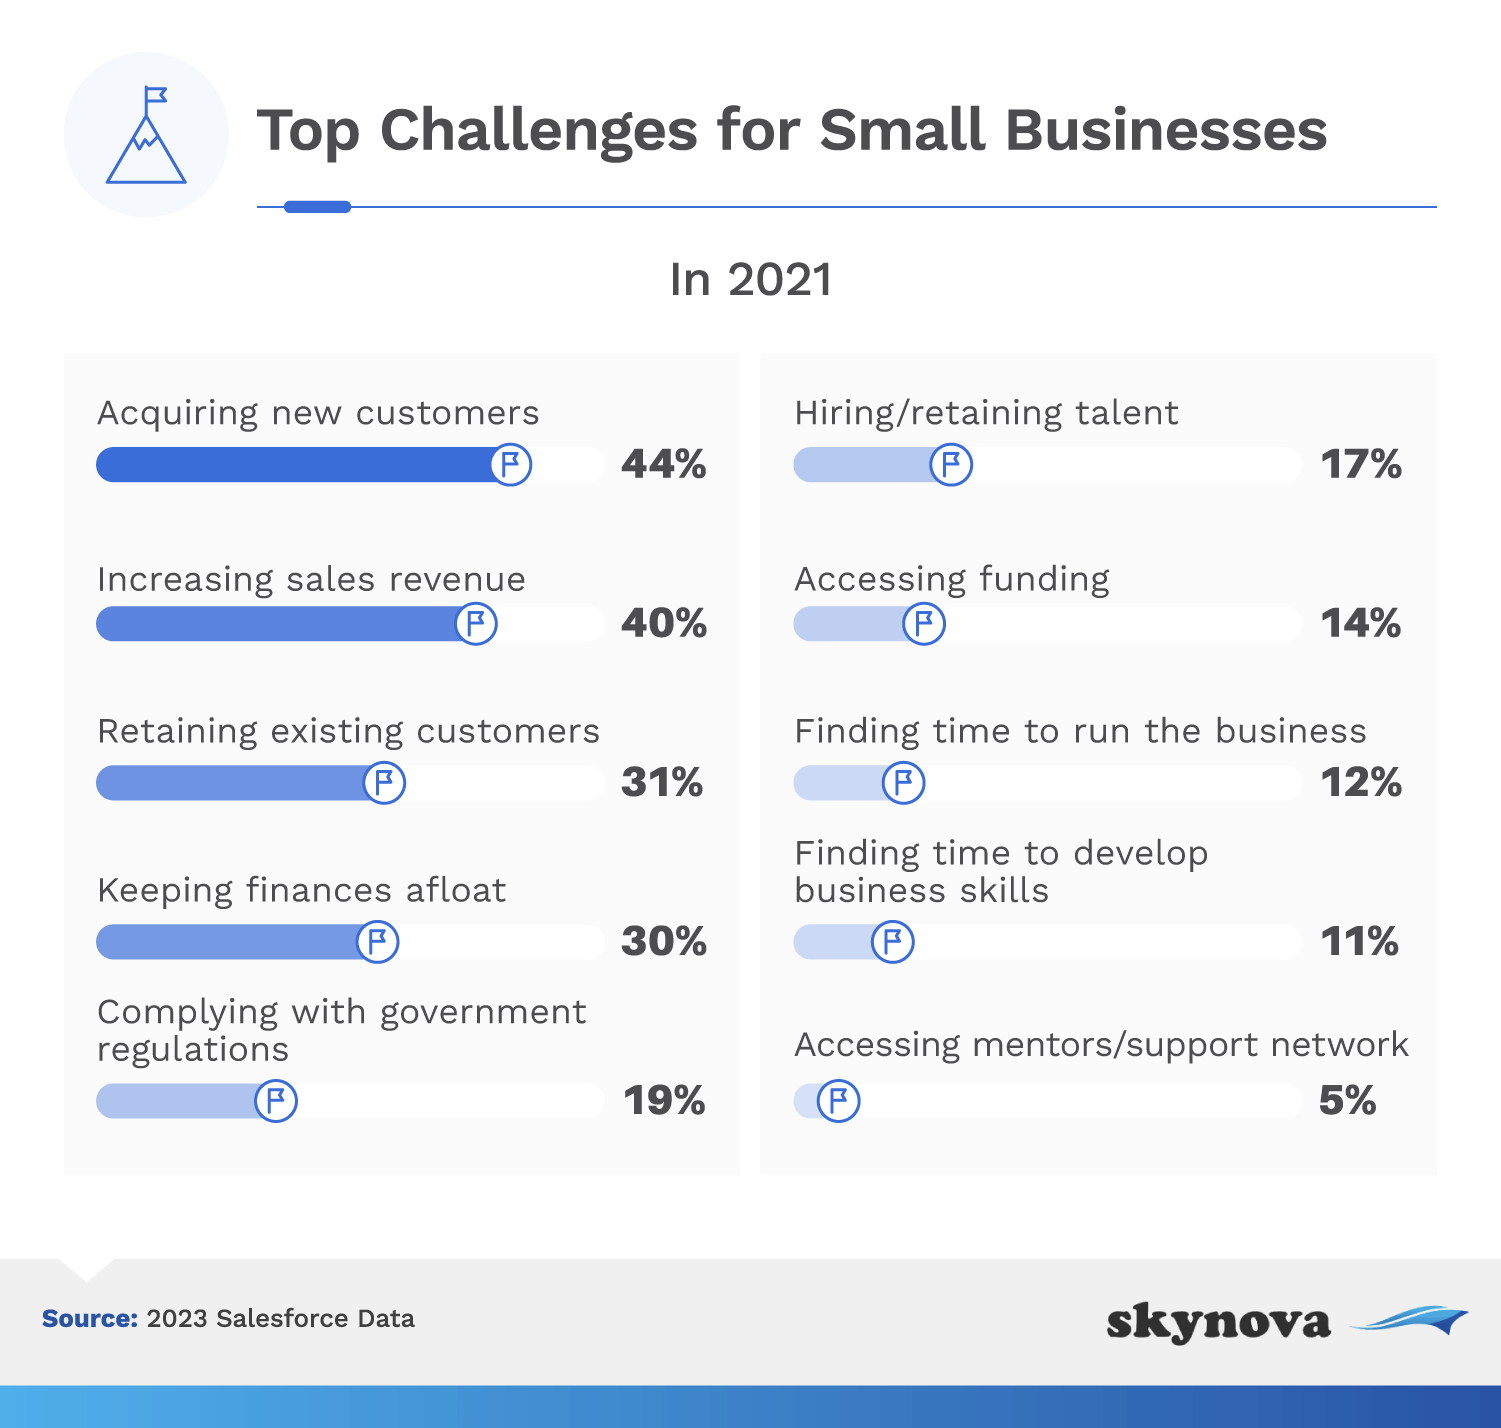 Top challenges for small businesses